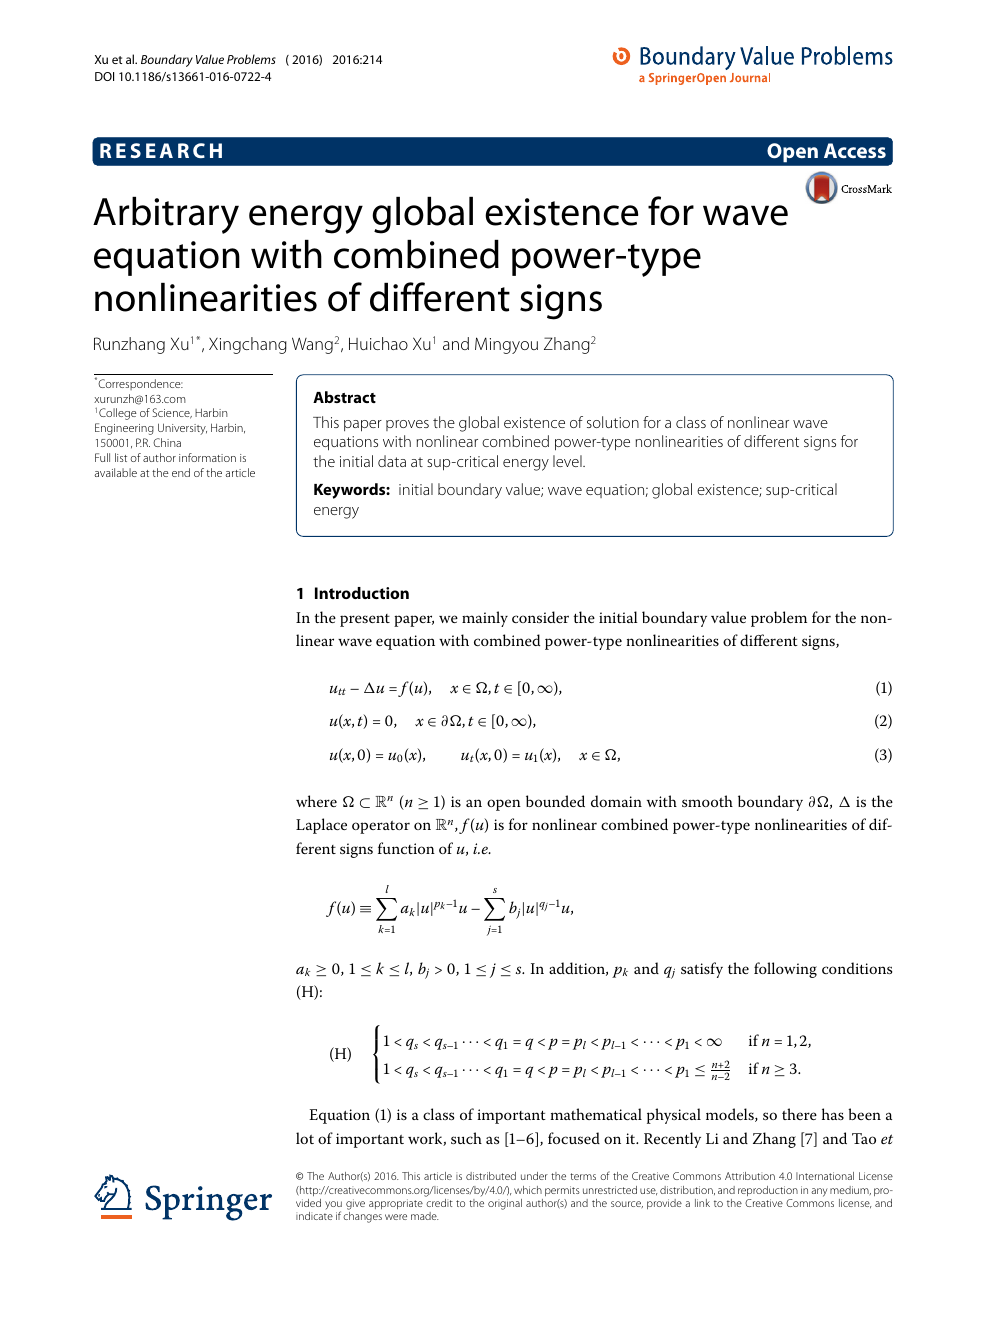 Arbitrary Energy Global Existence For Wave Equation With Combined Power Type Nonlinearities Of Different Signs Topic Of Research Paper In Mathematics Download Scholarly Article Pdf And Read For Free On Cyberleninka Open